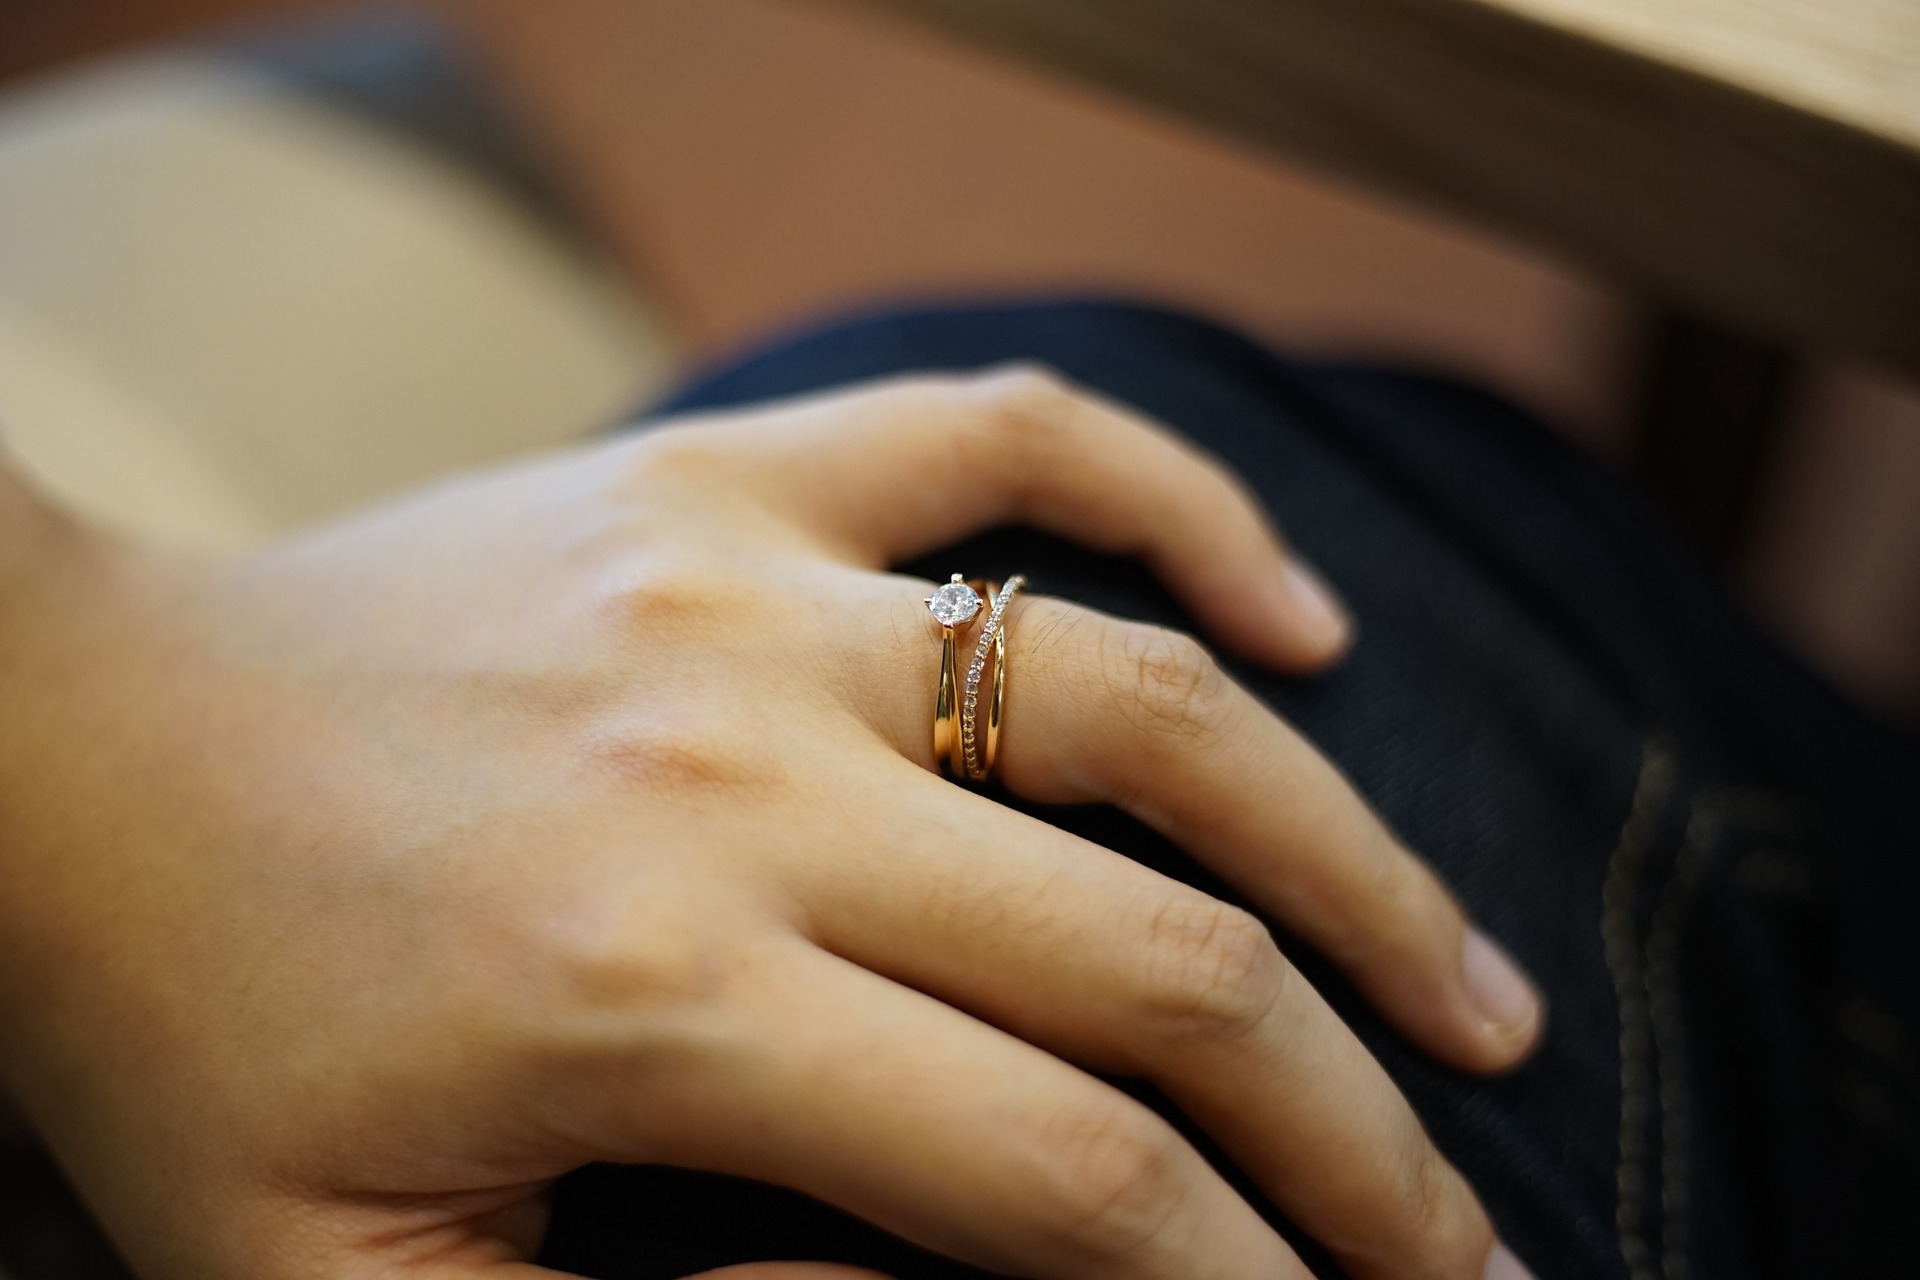 26-year-old decides to wear ring after injury, loses finger | Chennai News  - Times of India